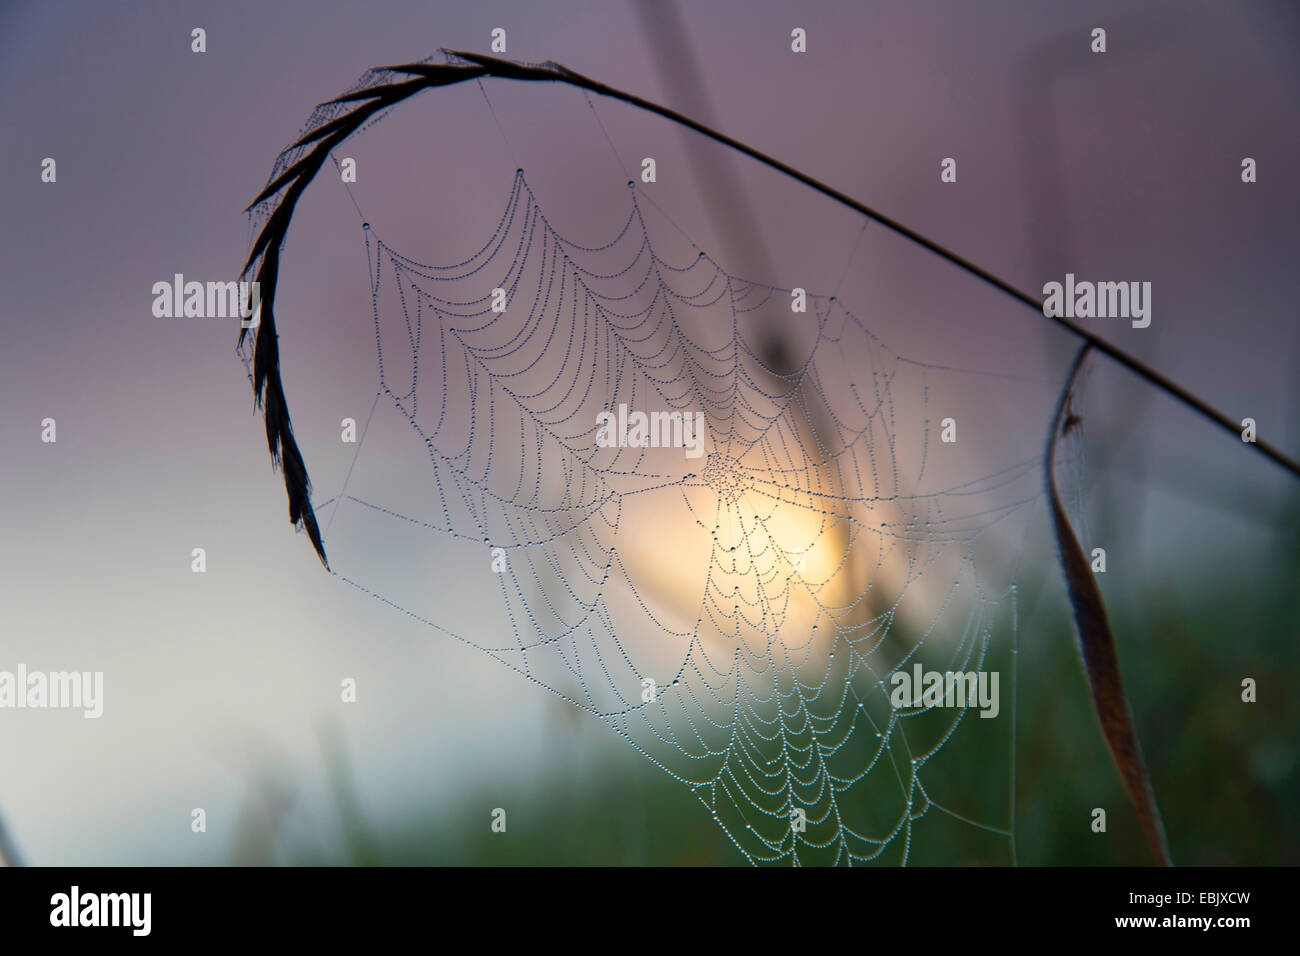 quackgrass (Agropyron repens, Elymus repens), spider web heavy from the morning dew fixes at a blade of grass in front of sunrise and morning fog over a meadow landscape, Germany, Saxony, Vogtlaendische Schweiz Stock Photo